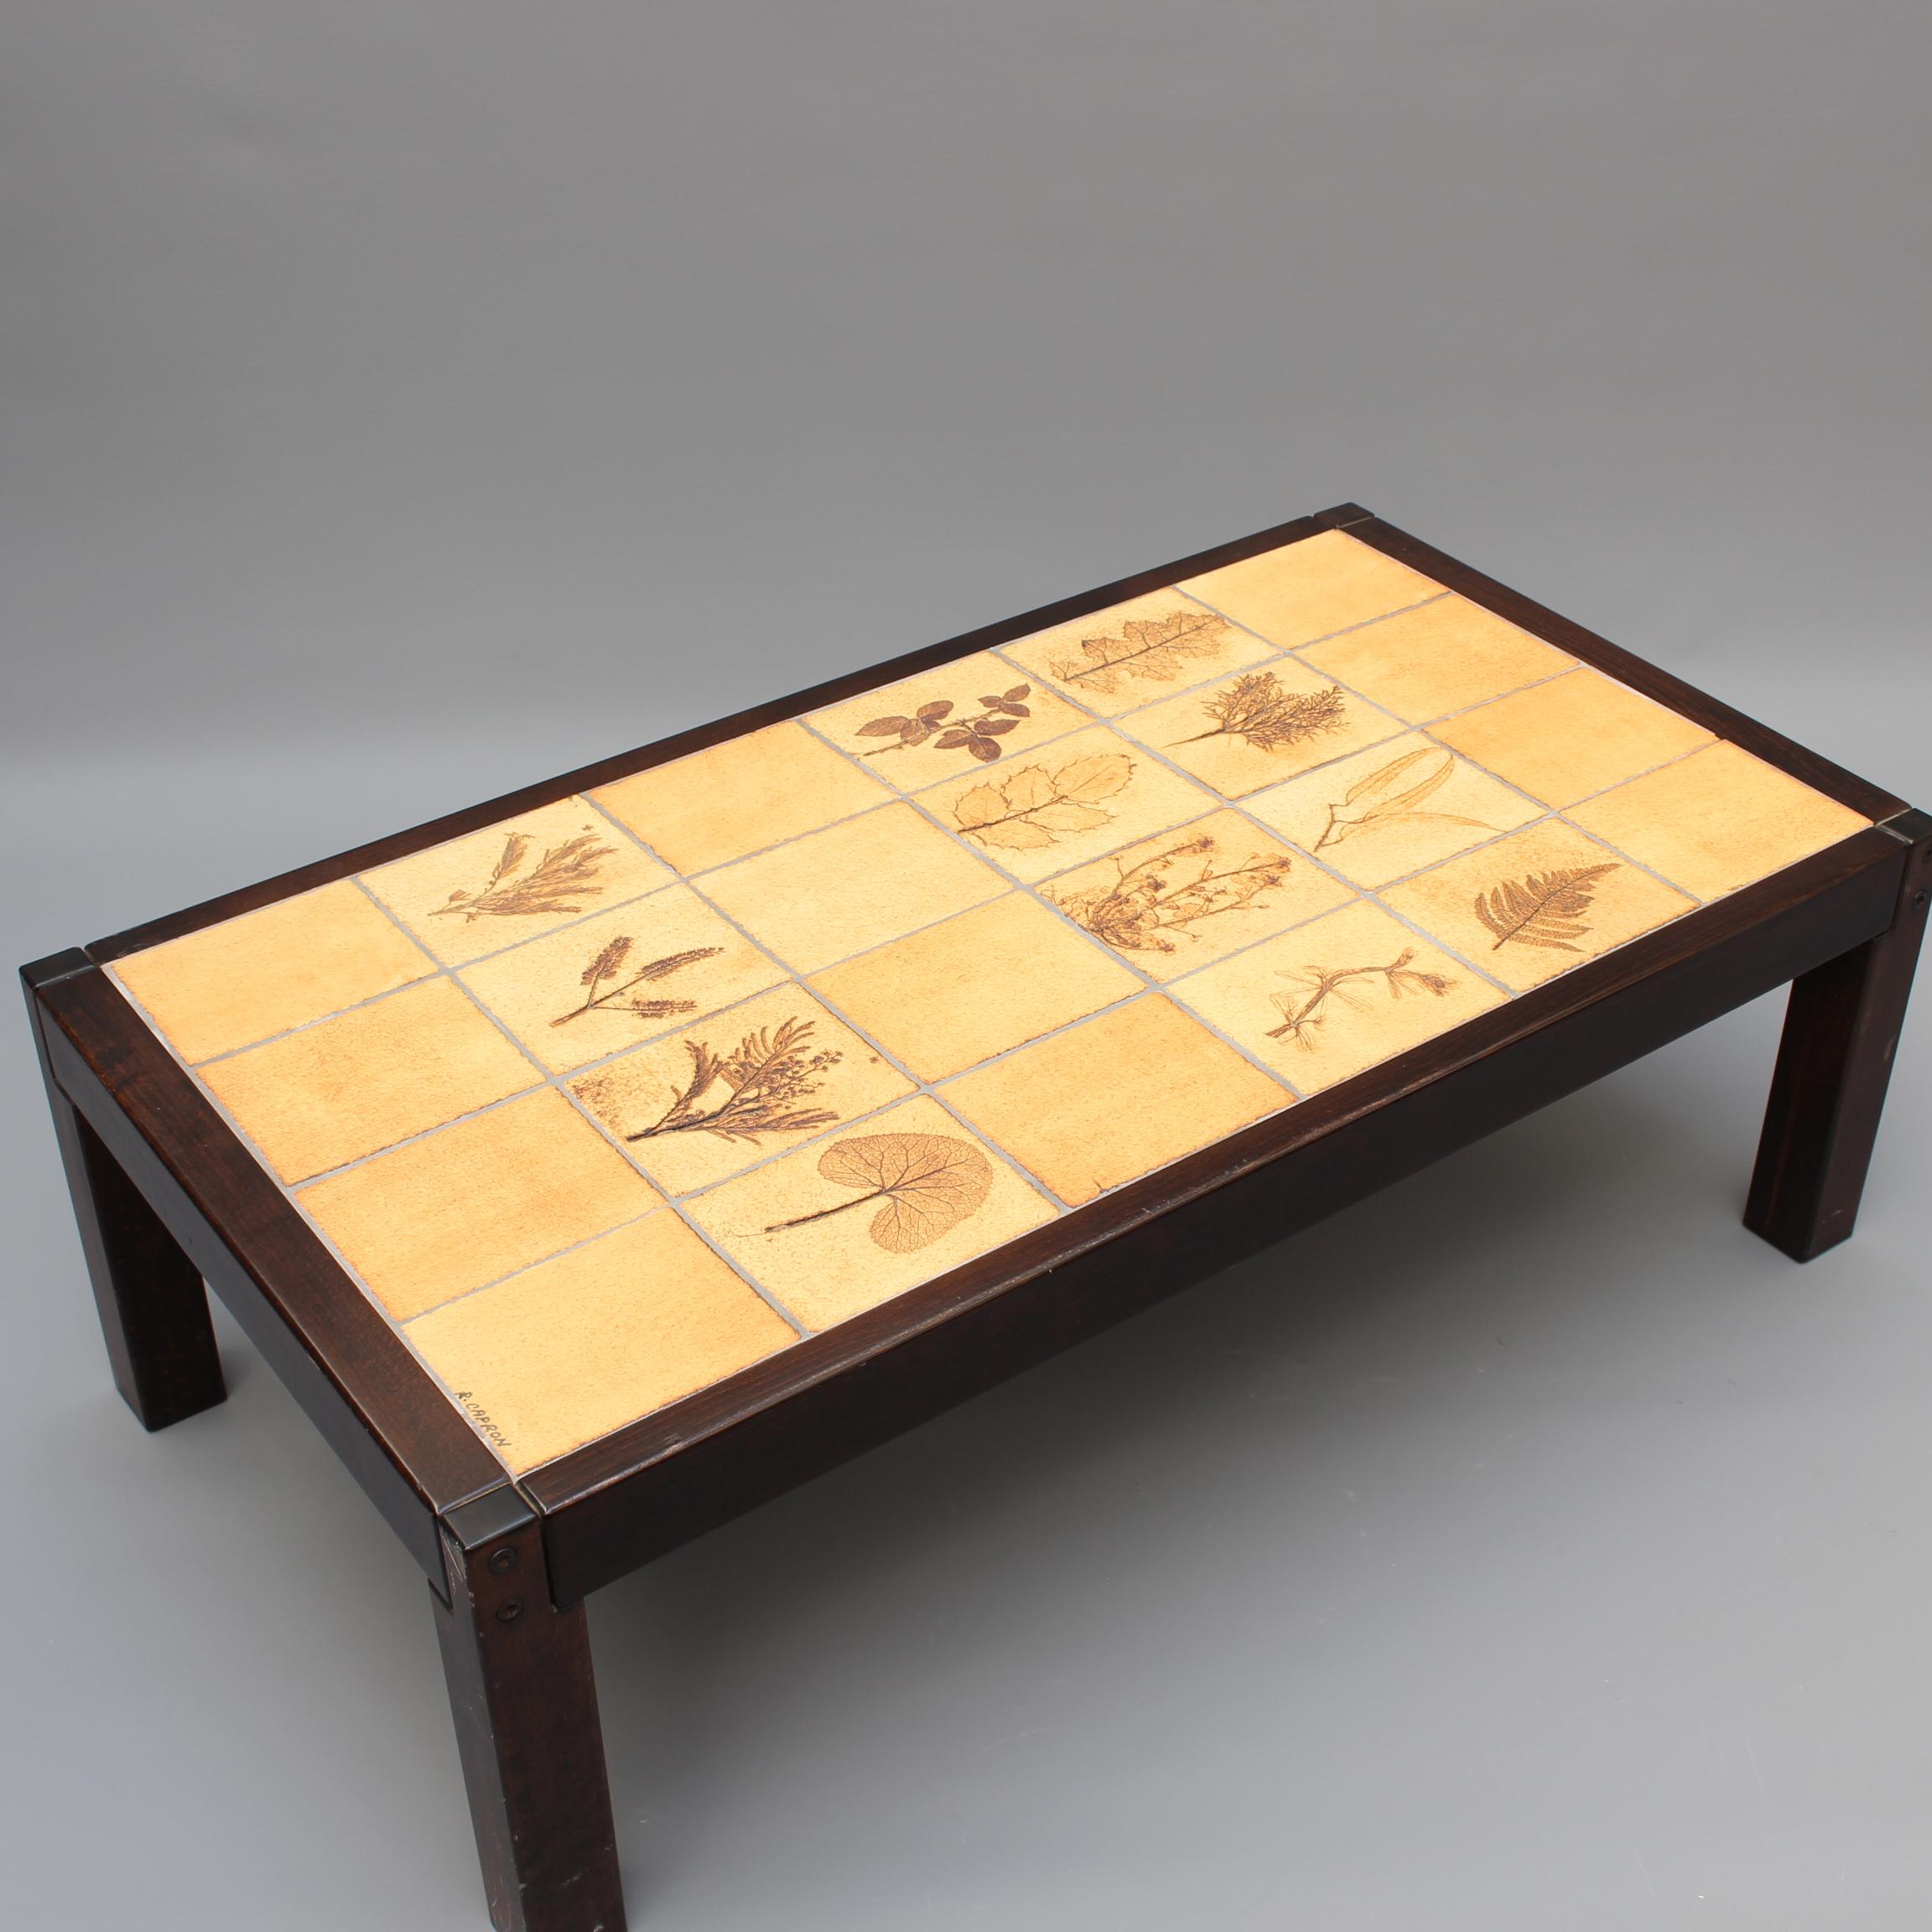 Ceramic Vintage French Coffee Table with Leaf Motif Tiles by Roger Capron (circa 1970s) For Sale